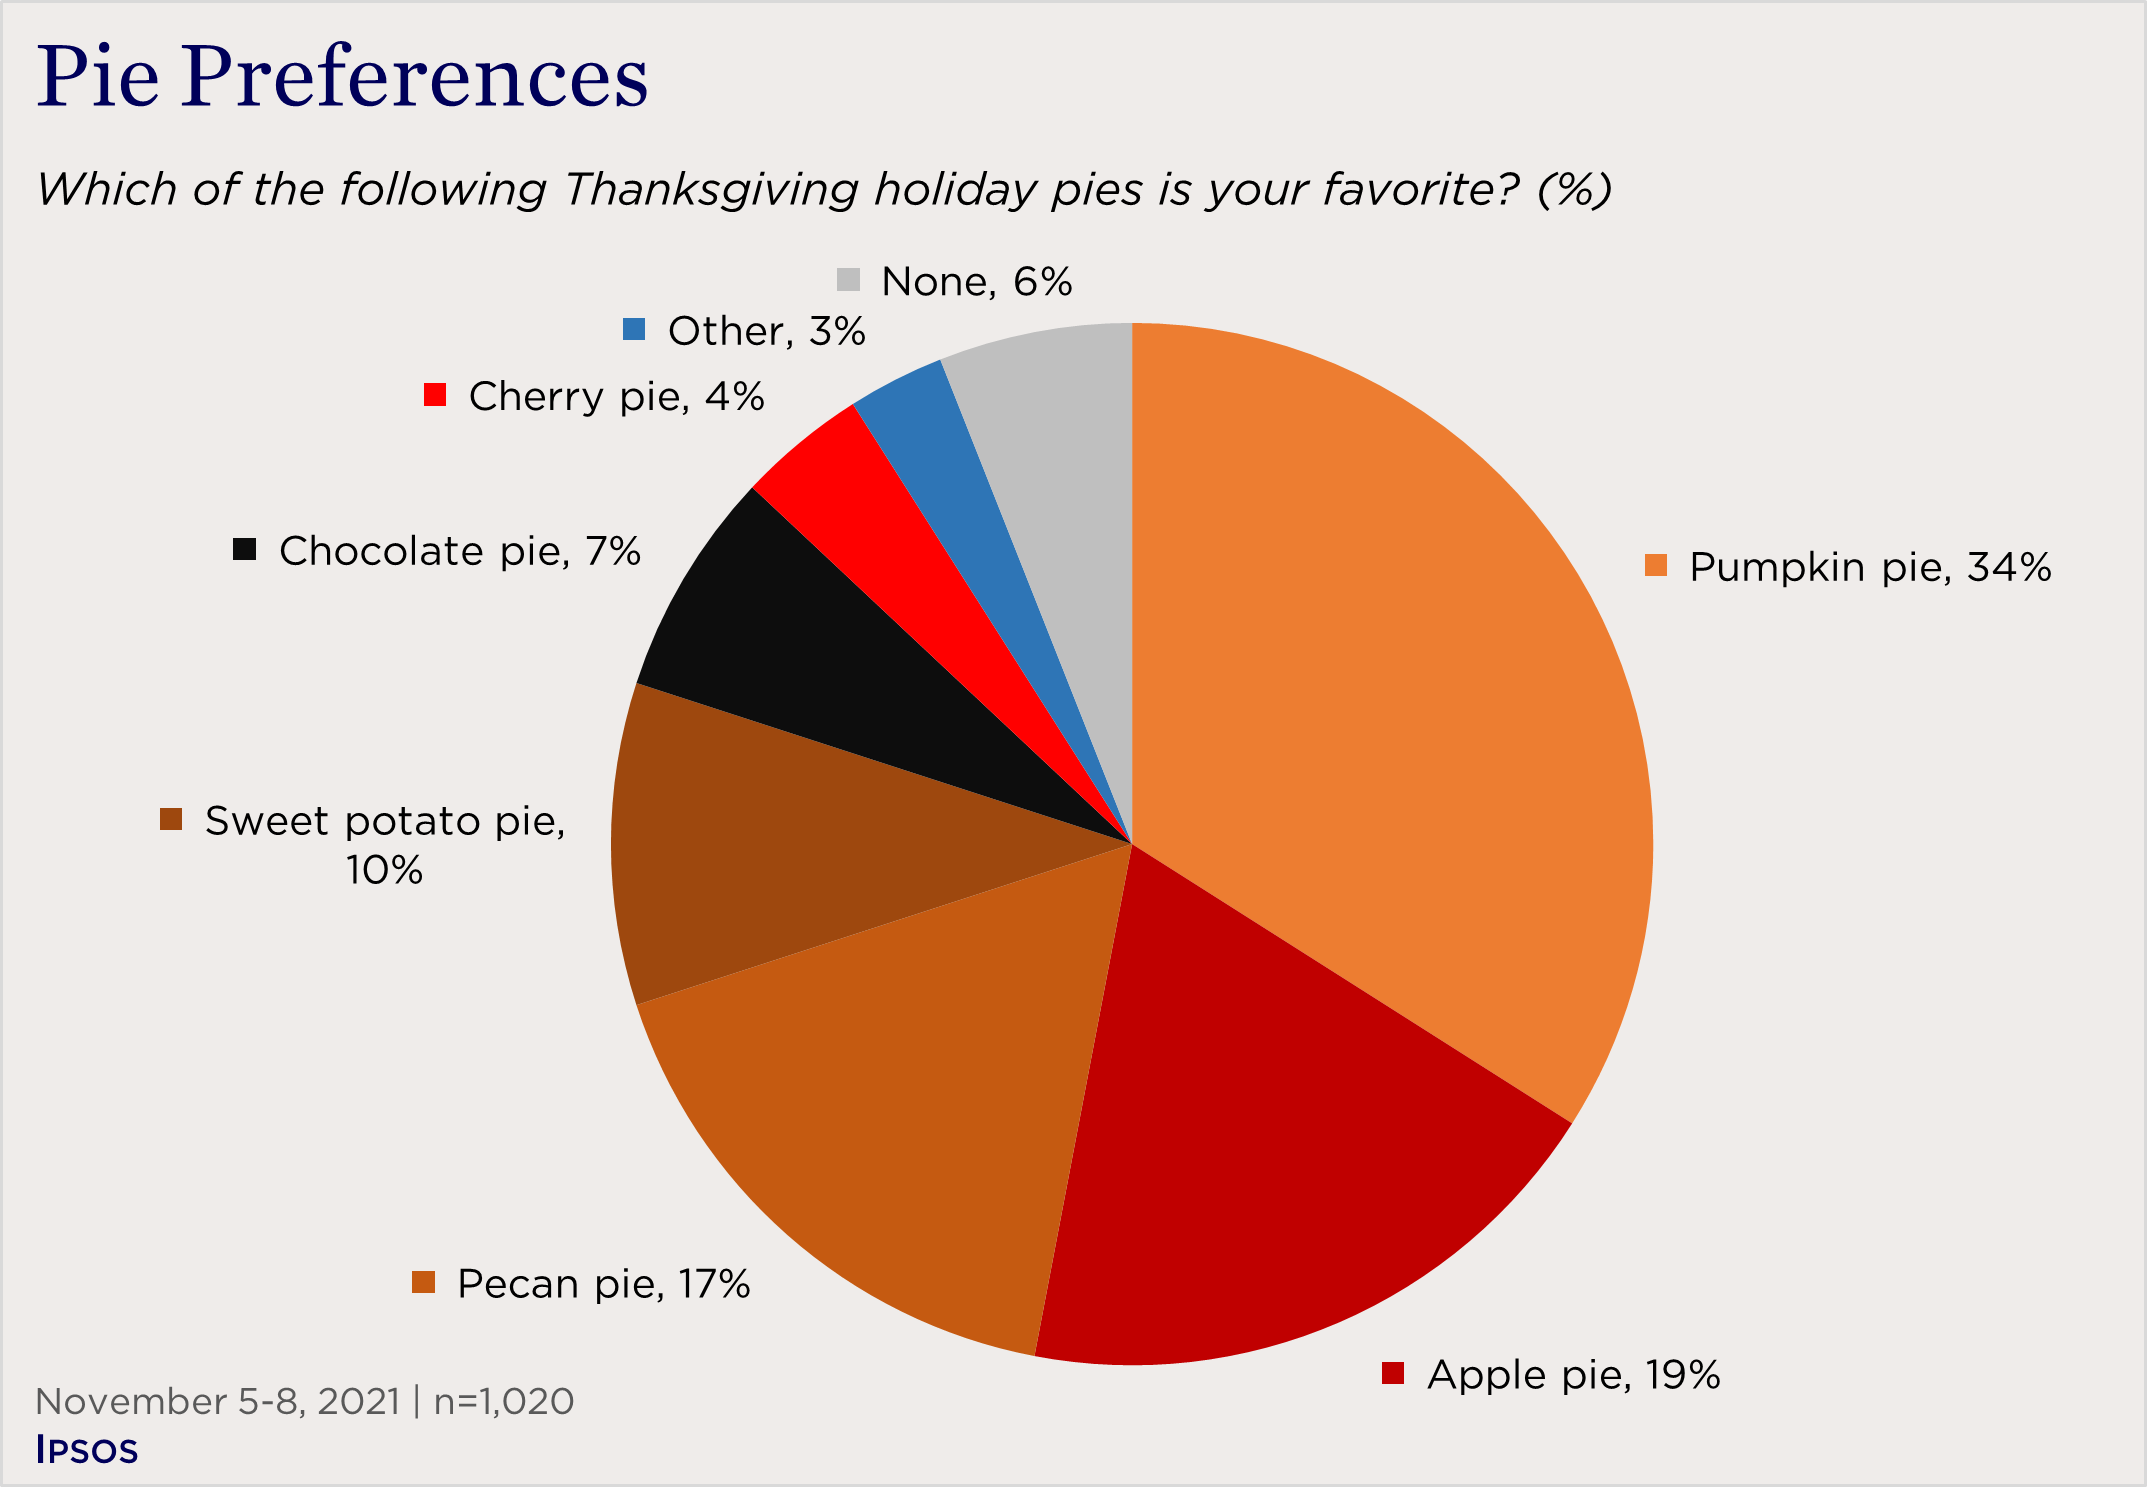 "pie chart showing American Thanksgiving pie preferences"